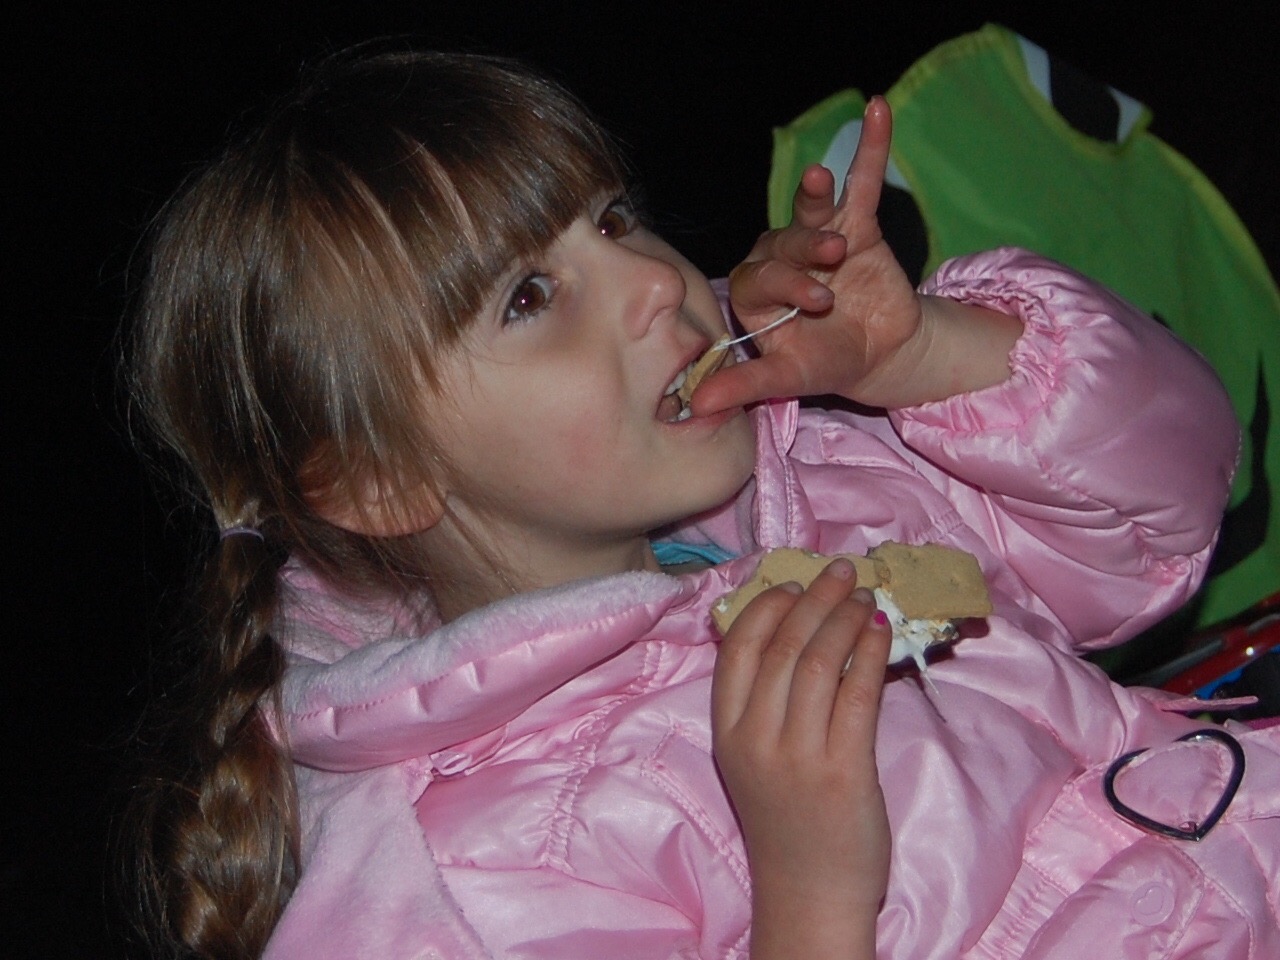 She was so excited to get a smores. She kept asking to "go camping" I think this is what she meant!